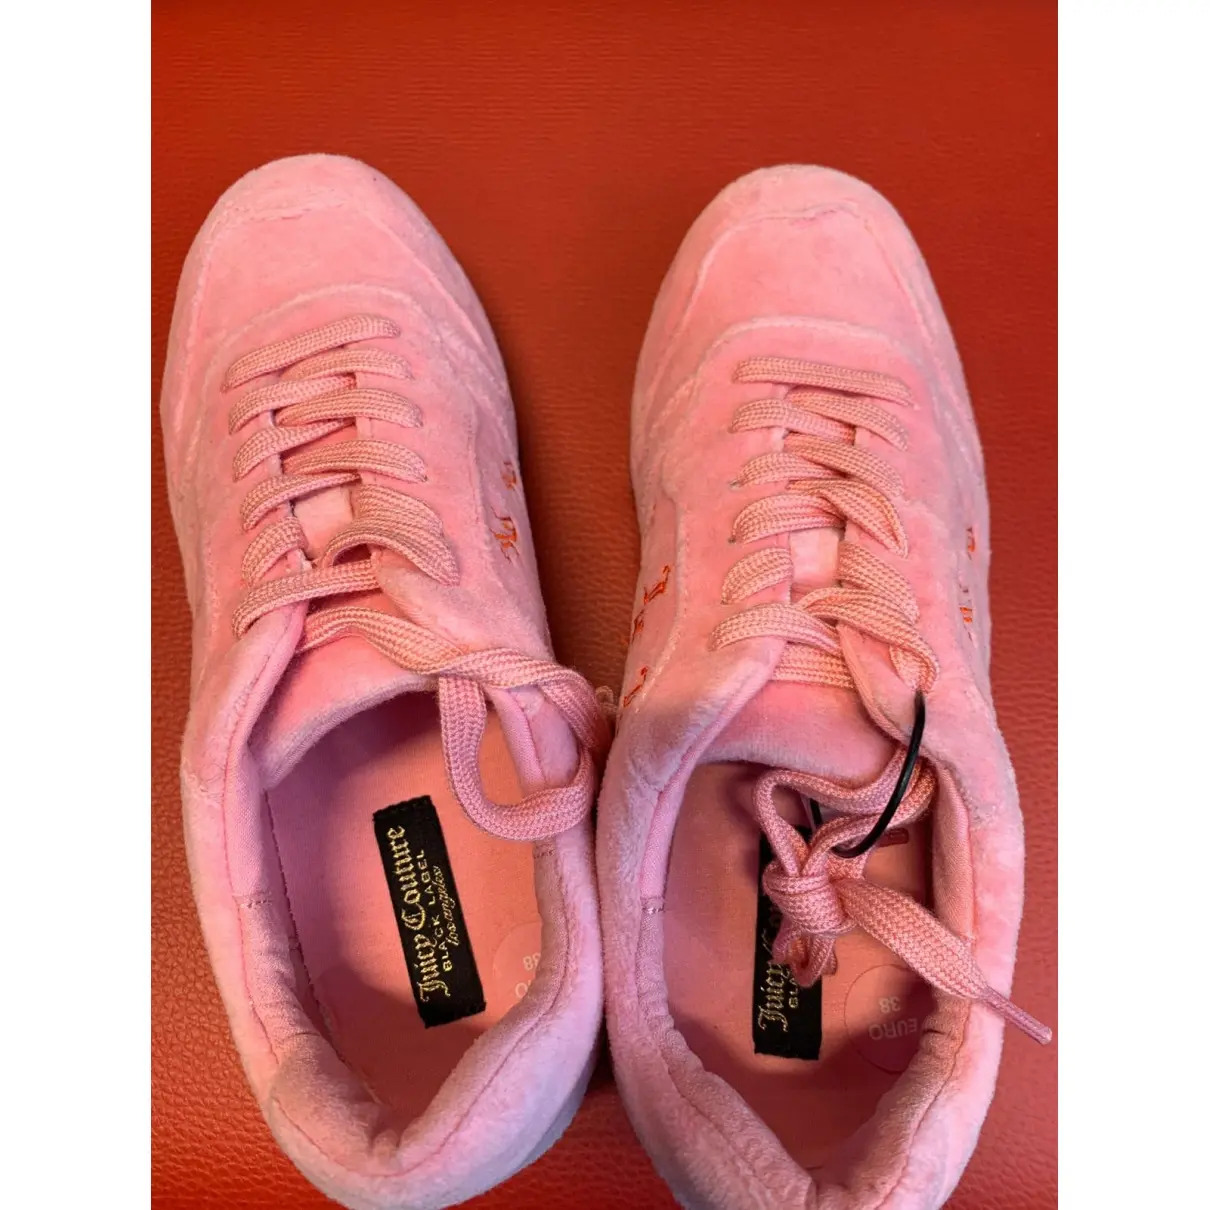 Juicy Couture Cloth trainers for sale